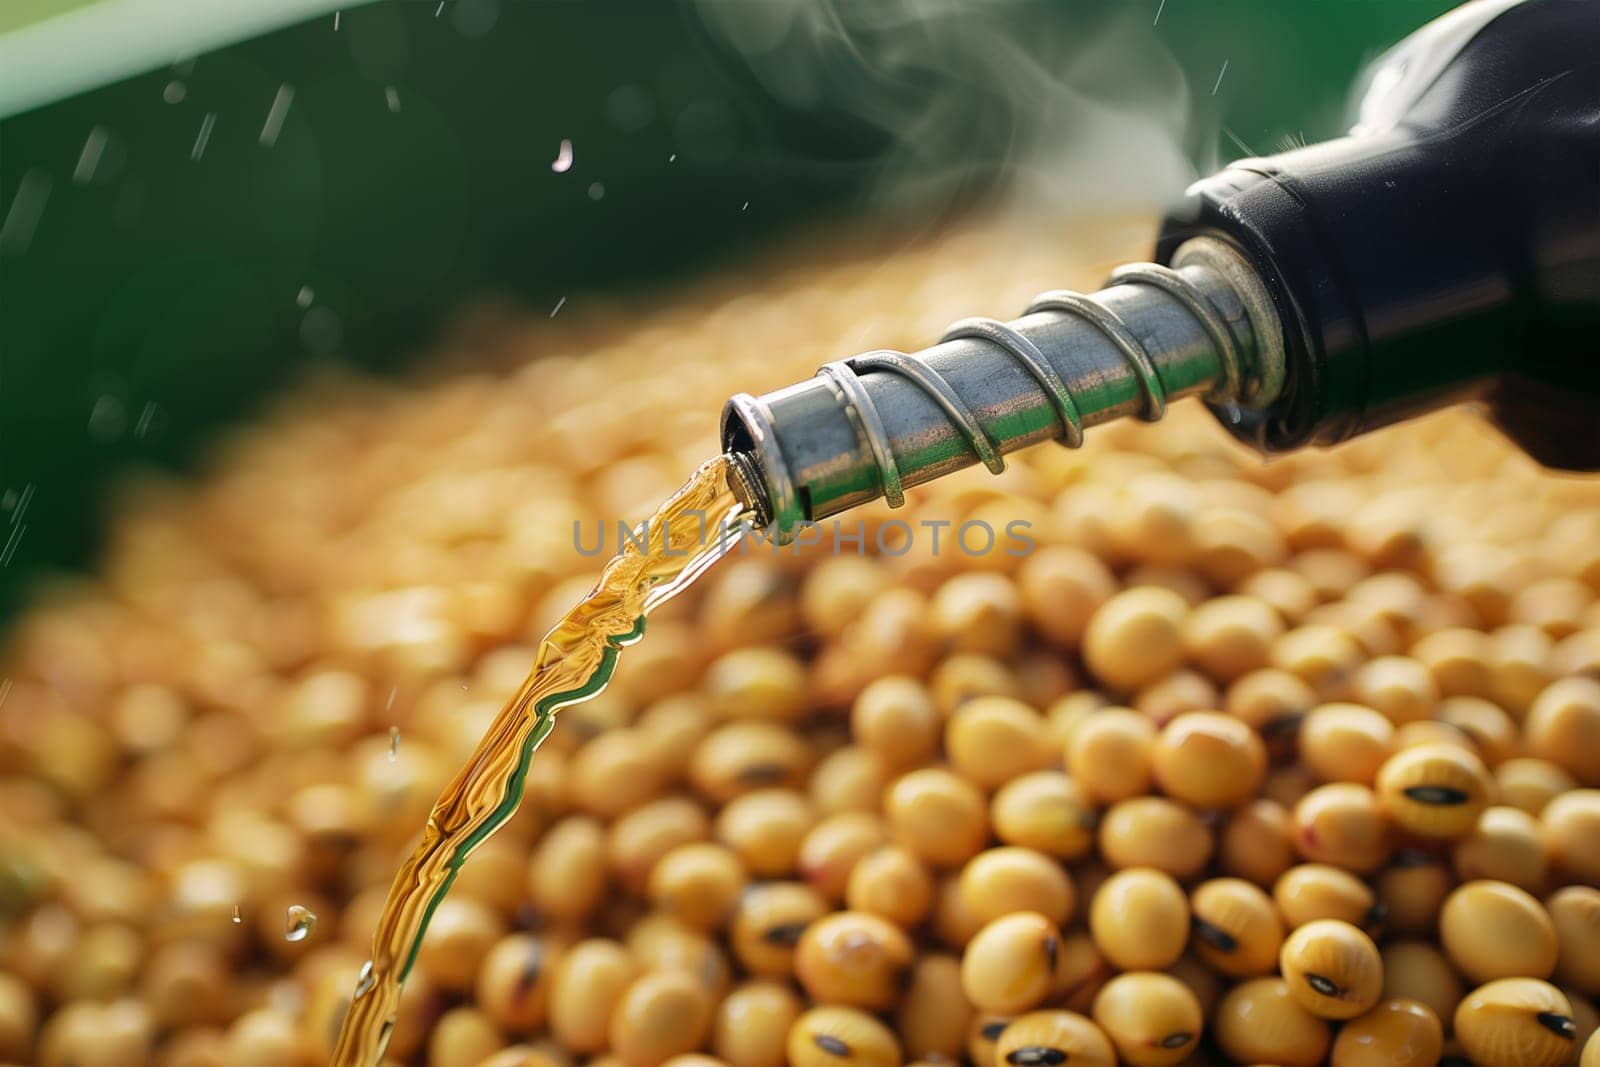 A stream of golden soybean oil pours from a bottle, glistening as it cascades over a mound of raw soybeans, showcasing a key stage in oil production.